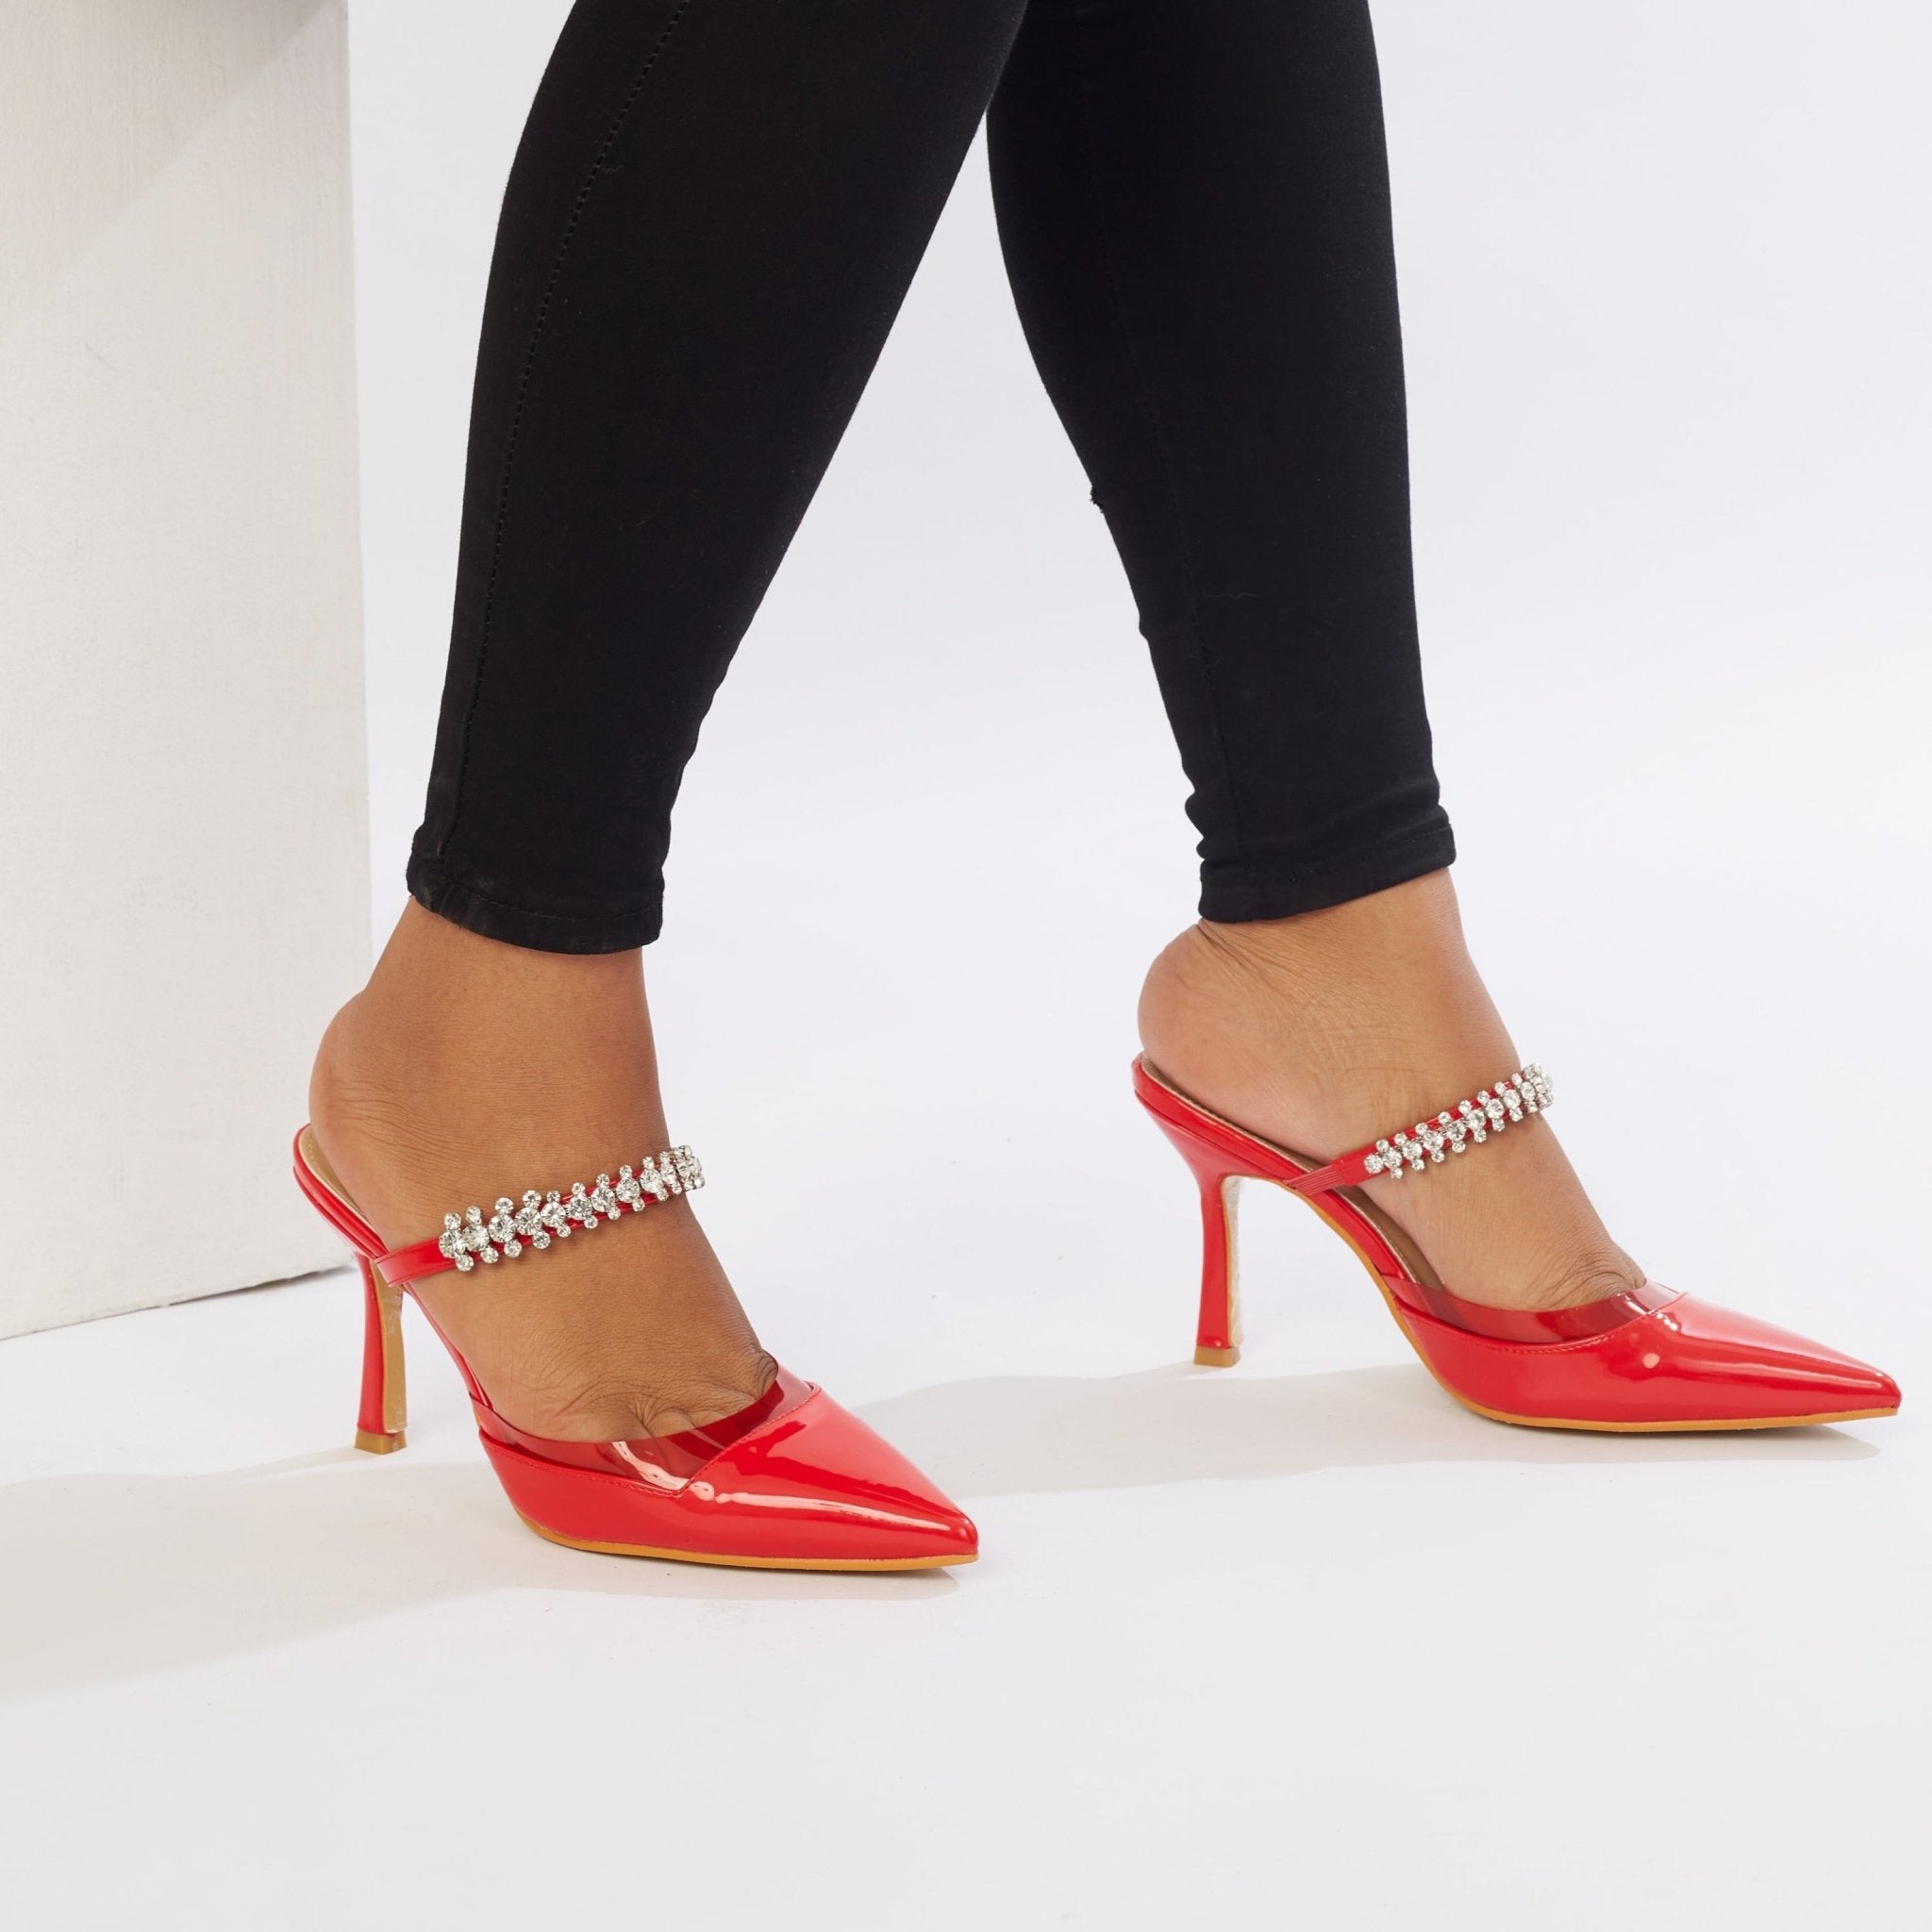 SILHOUETTE IN RED - Outlash brand